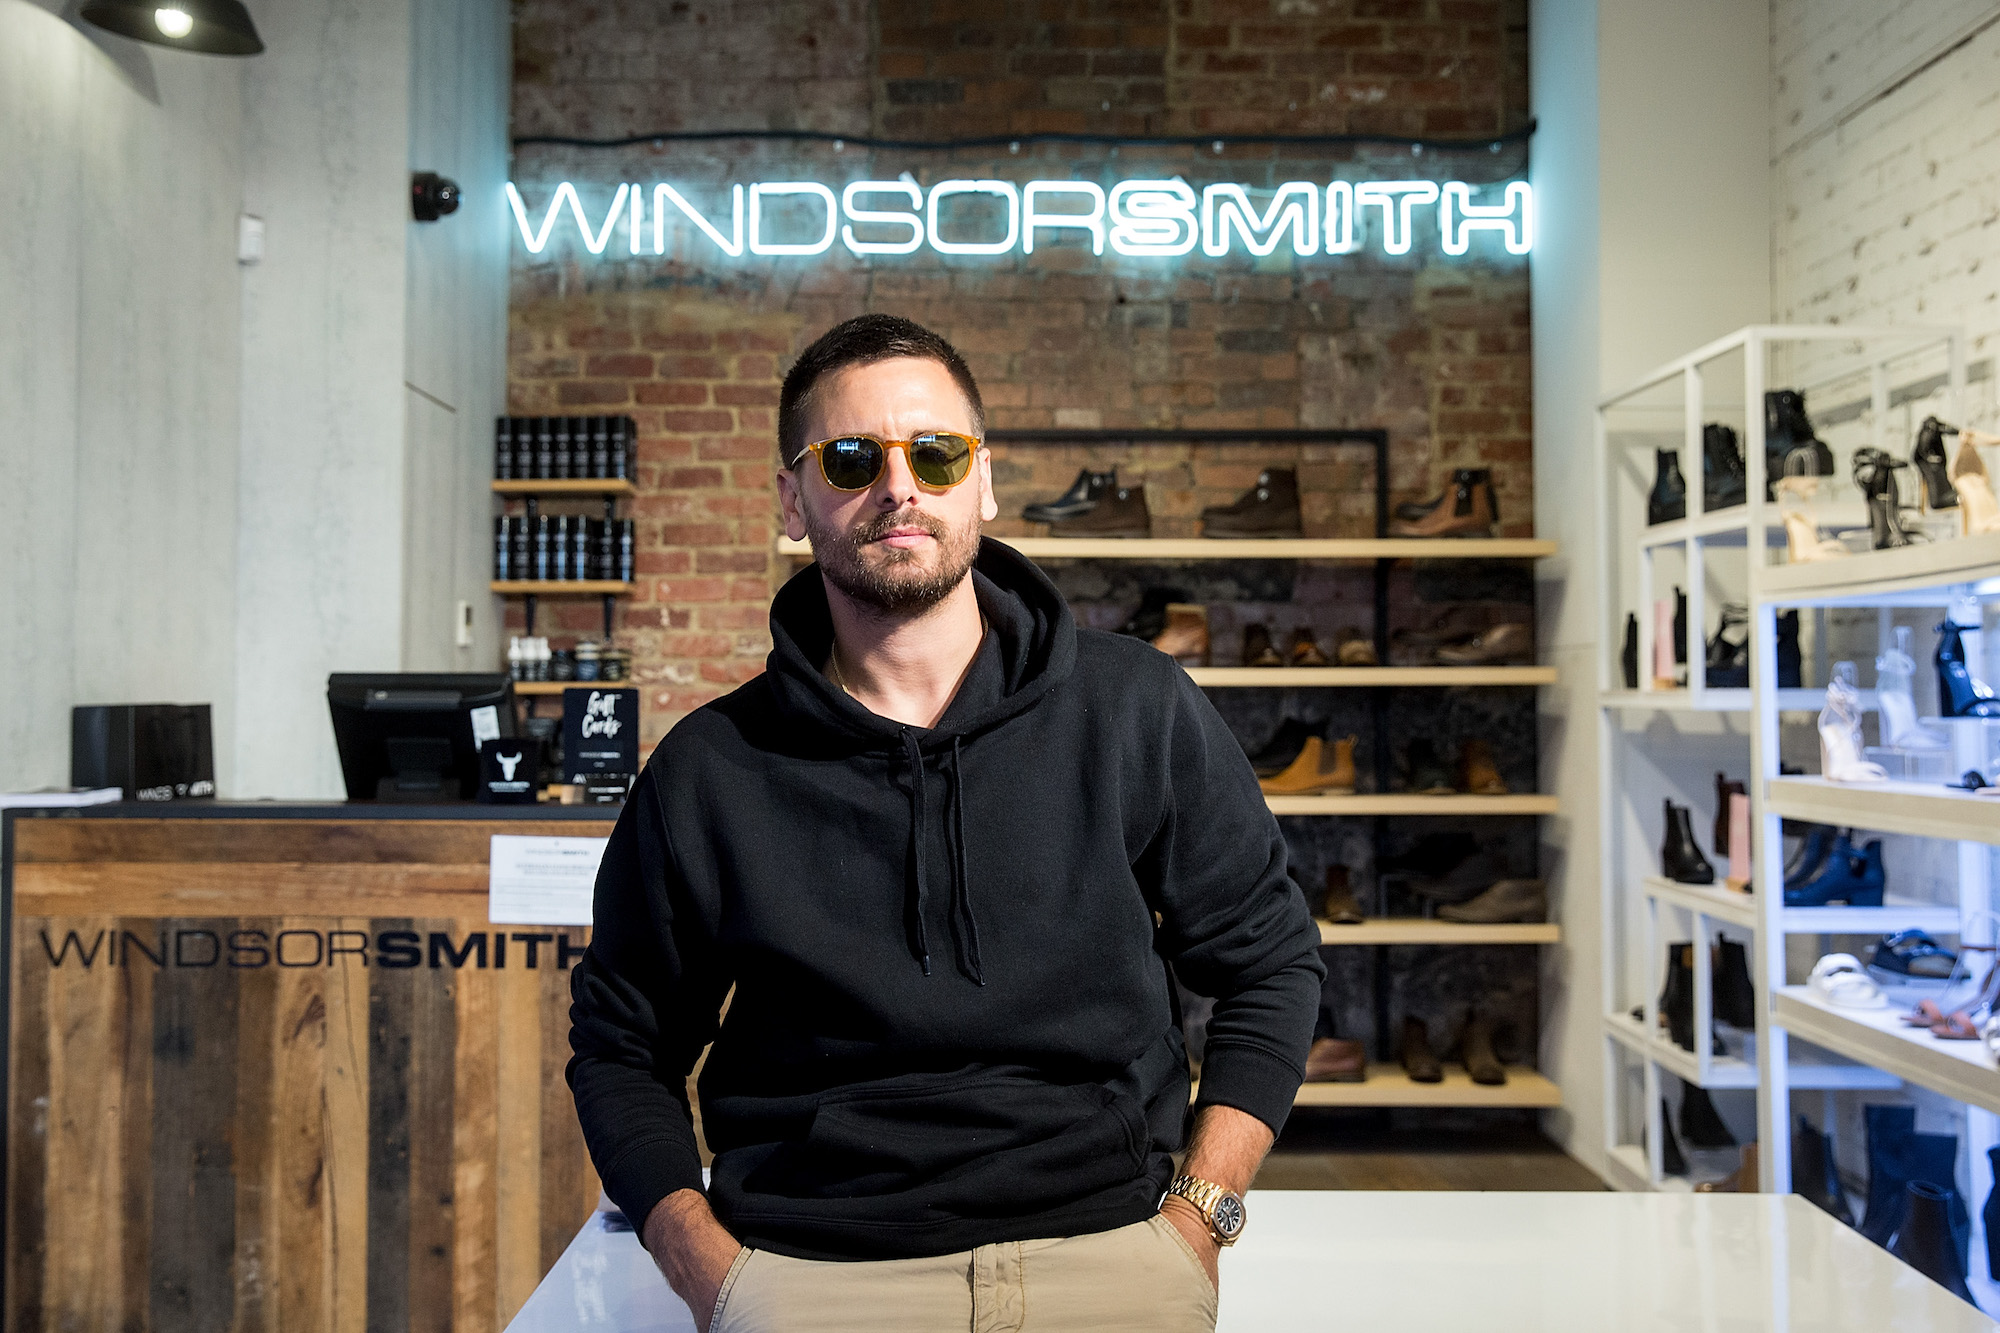 Scott Disick appearing at Windsor Smith in Melbourne, Australia in 2018